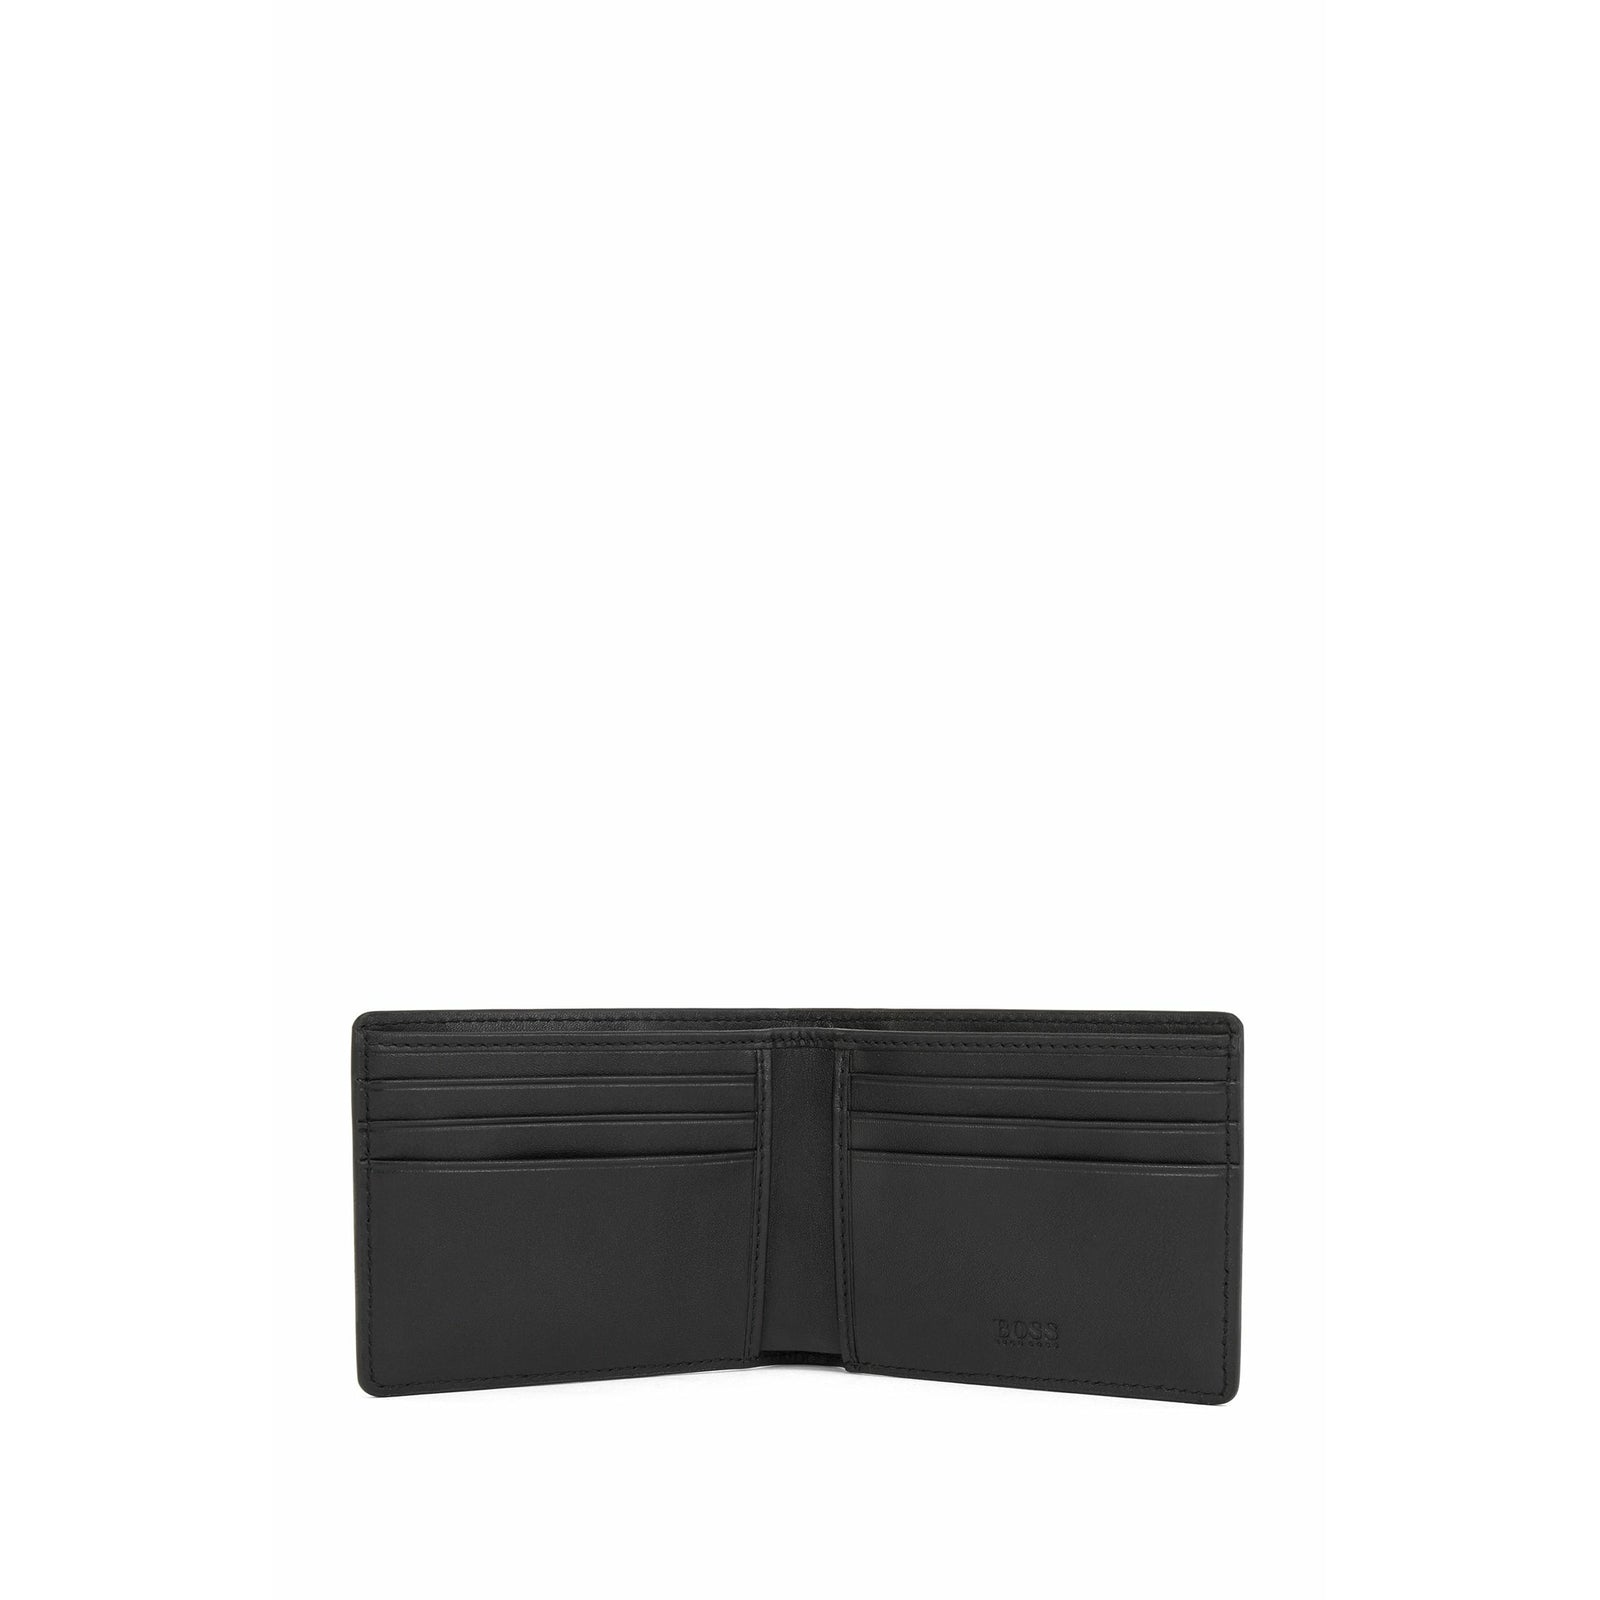 BILLFOLD WALLET IN NAPPA LEATHER WITH SIX CARD SLOTS - Yooto